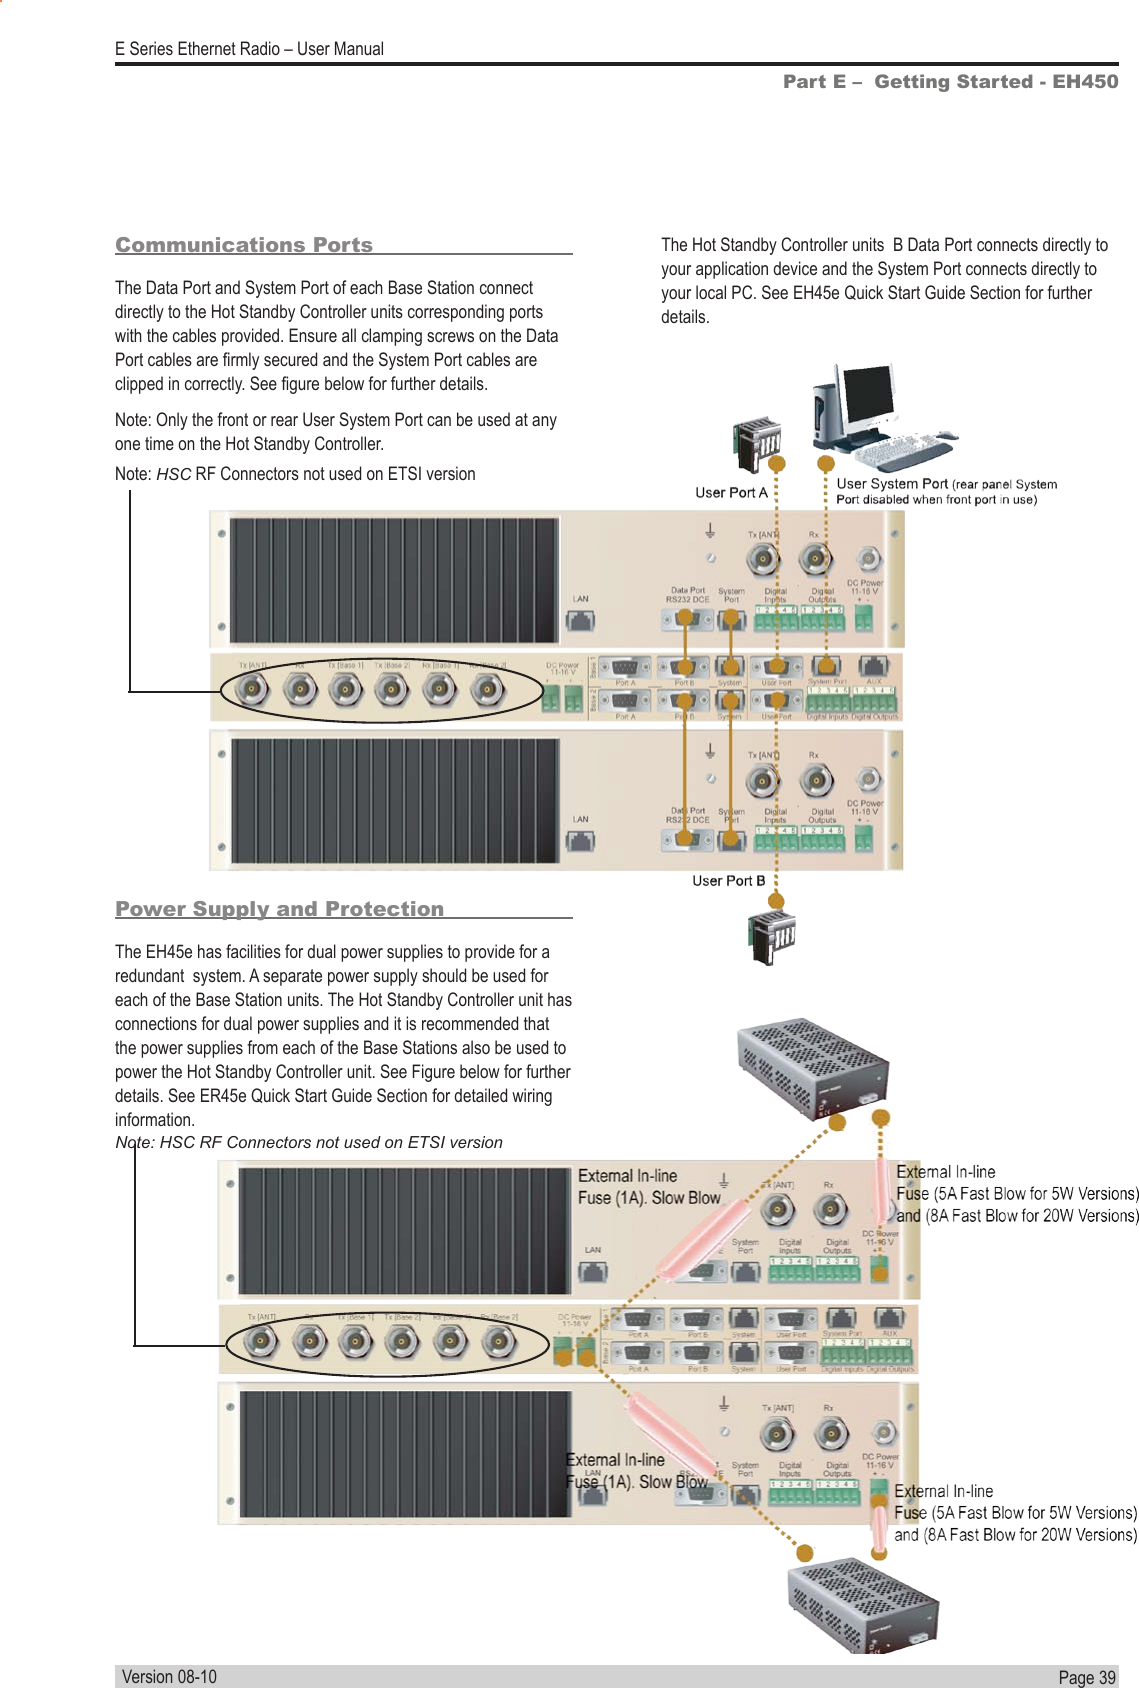 Page  39  E Series Ethernet Radio – User ManualVersion 08-10Communications PortsThe Data Port and System Port of each Base Station connect directly to the Hot Standby Controller units corresponding ports with the cables provided. Ensure all clamping screws on the Data Port cables are rmly secured and the System Port cables are clipped in correctly. See gure below for further details.Note: Only the front or rear User System Port can be used at any one time on the Hot Standby Controller.Power Supply and ProtectionThe EH45e has facilities for dual power supplies to provide for a redundant  system. A separate power supply should be used for each of the Base Station units. The Hot Standby Controller unit has connections for dual power supplies and it is recommended that the power supplies from each of the Base Stations also be used to power the Hot Standby Controller unit. See Figure below for further details. See ER45e Quick Start Guide Section for detailed wiring information.The Hot Standby Controller units  B Data Port connects directly to your application device and the System Port connects directly to your local PC. See EH45e Quick Start Guide Section for further details.Part E –  Getting Started - EH450Note: HSC RF Connectors not used on ETSI versionNote: HSC RF Connectors not used on ETSI version